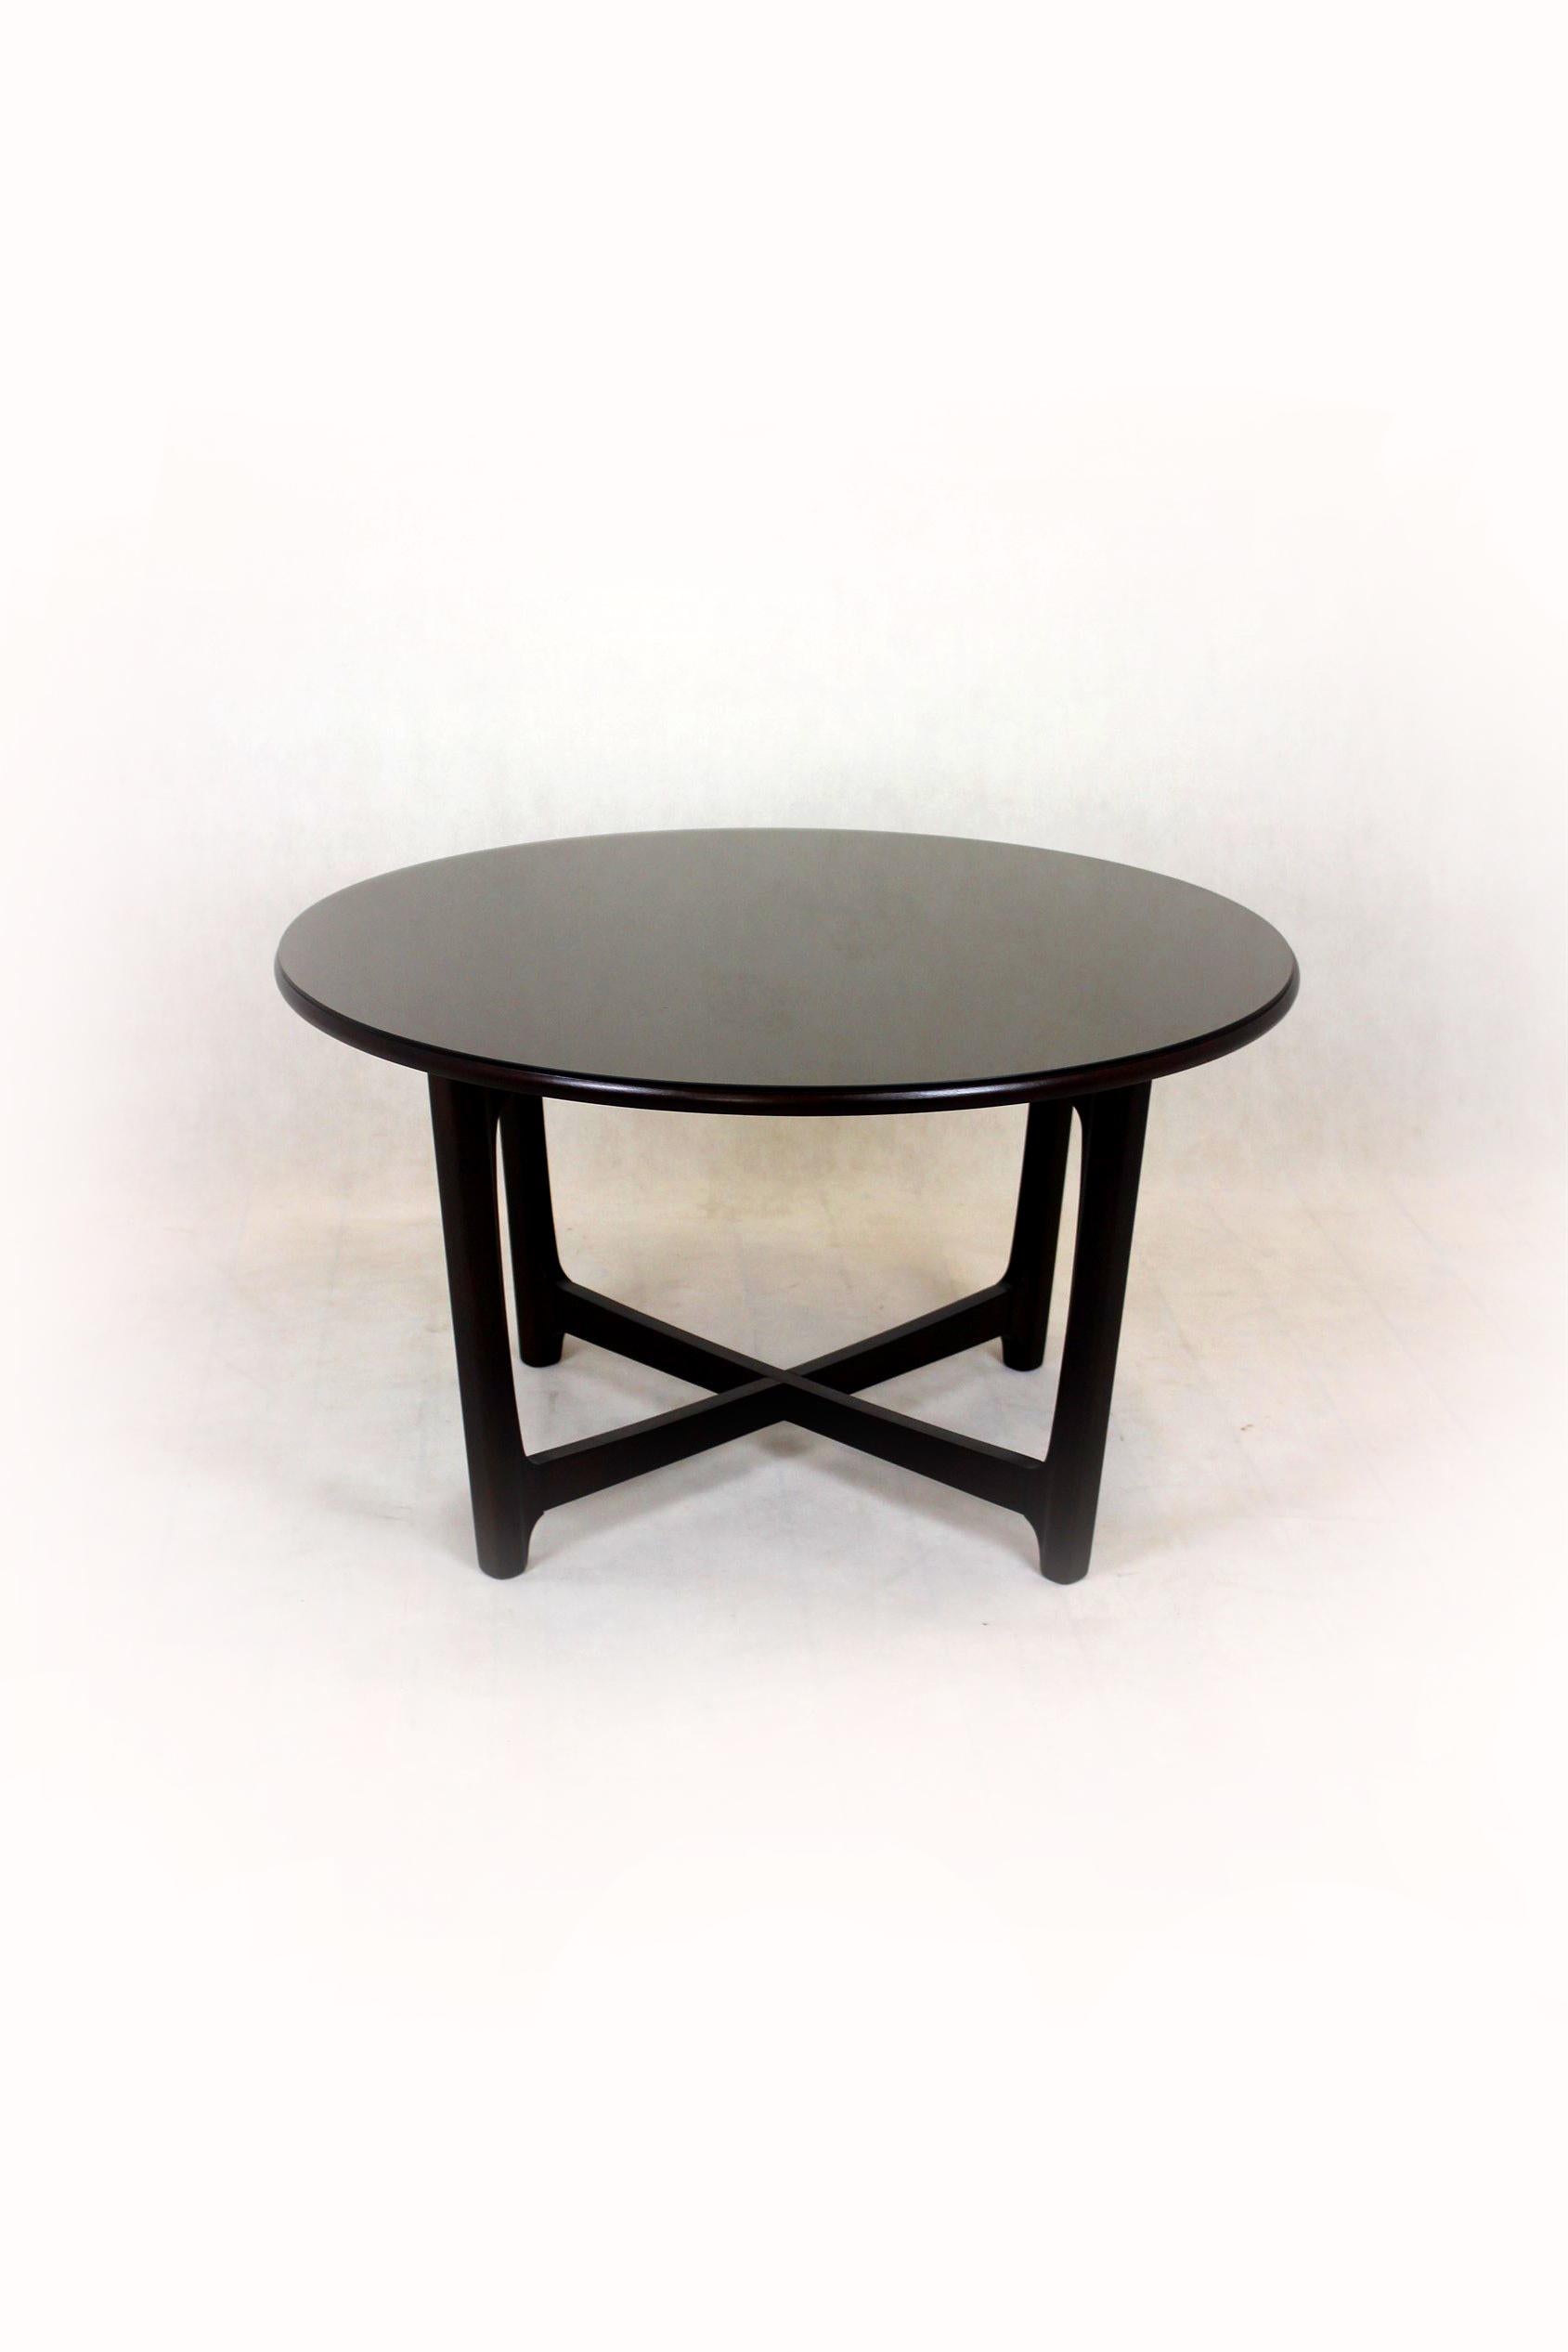 20th Century Restored Wooden Round Coffee Table, Czechoslovakia, 1970s For Sale